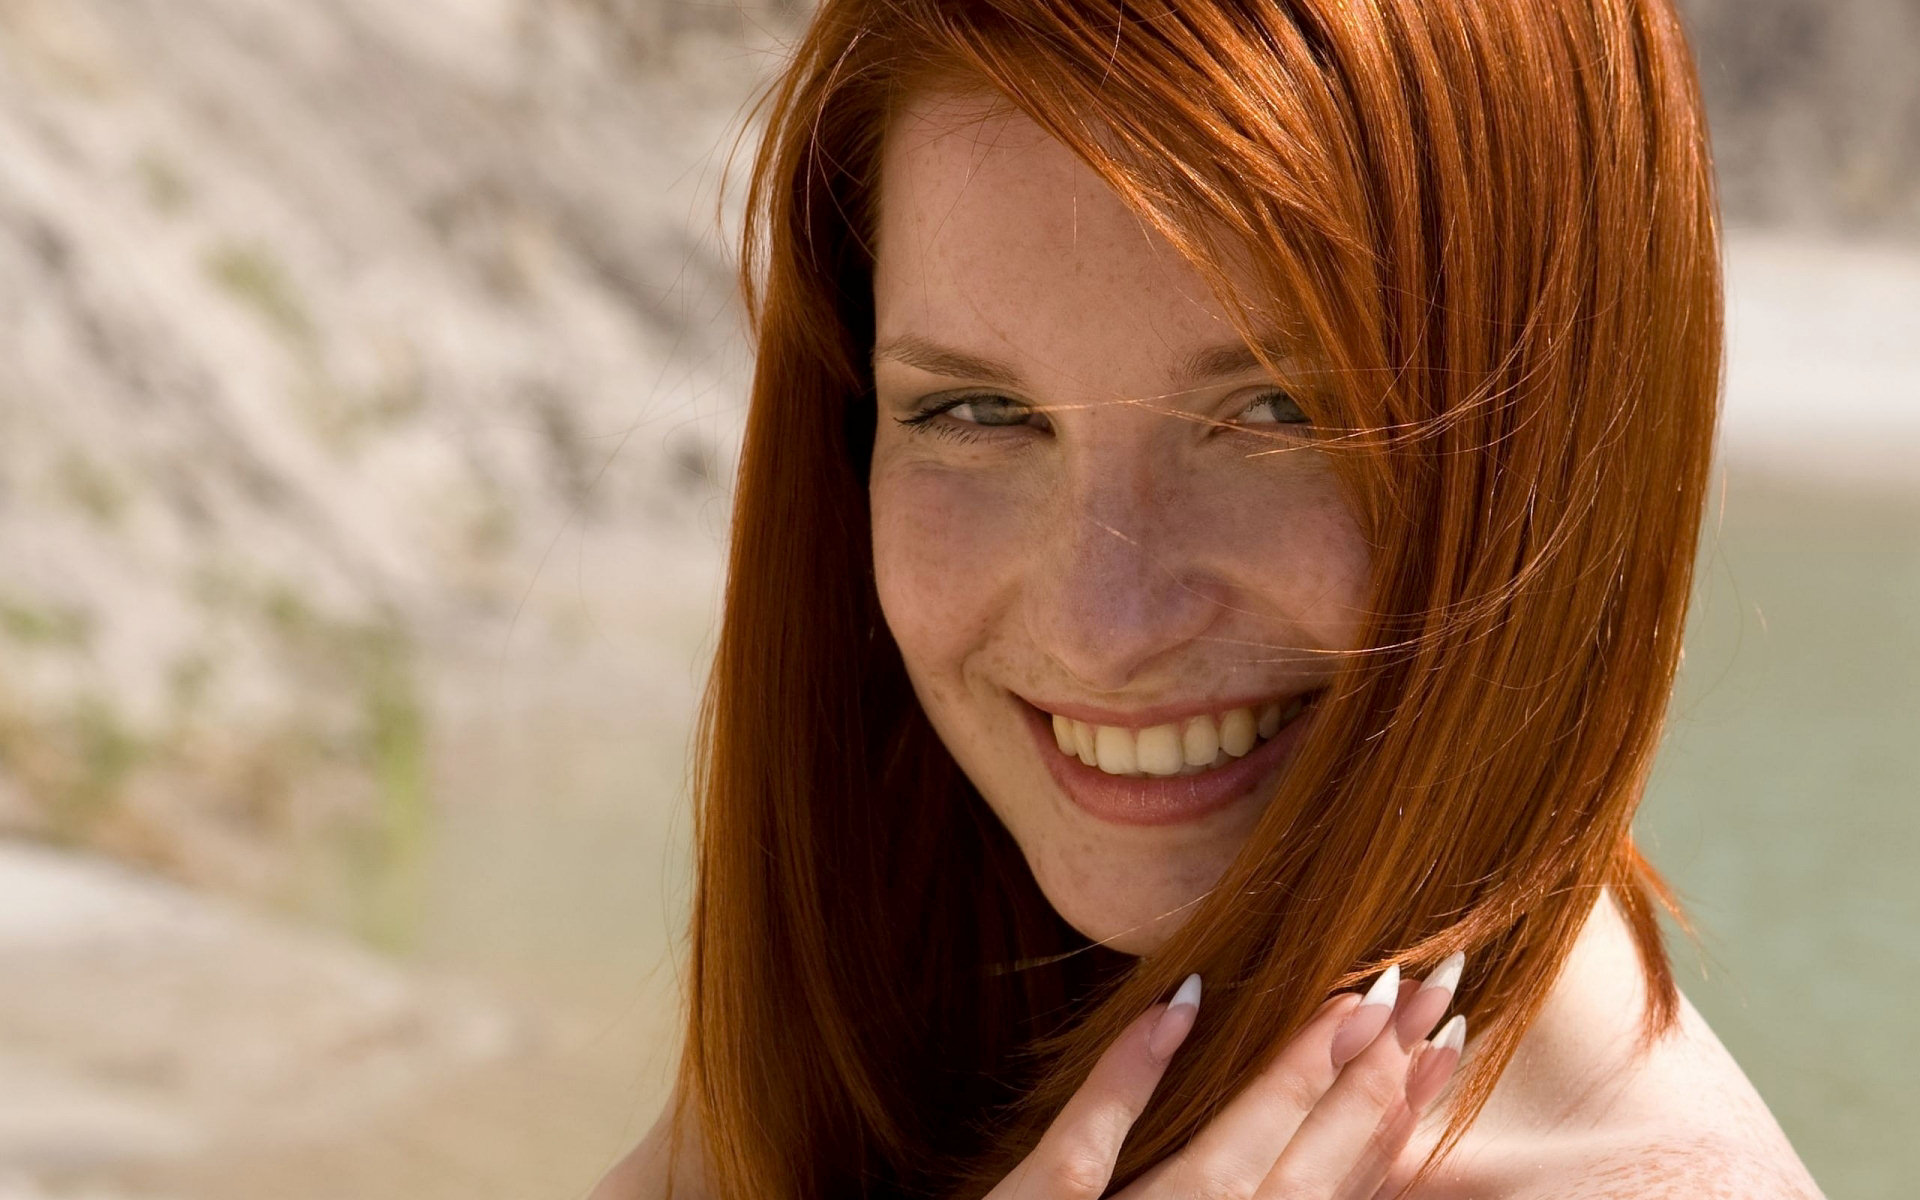 Free Download Redhead Girl 1920x1080 Wallpaper Archives Page 2 Of 5 1920x1080 For Your Desktop 